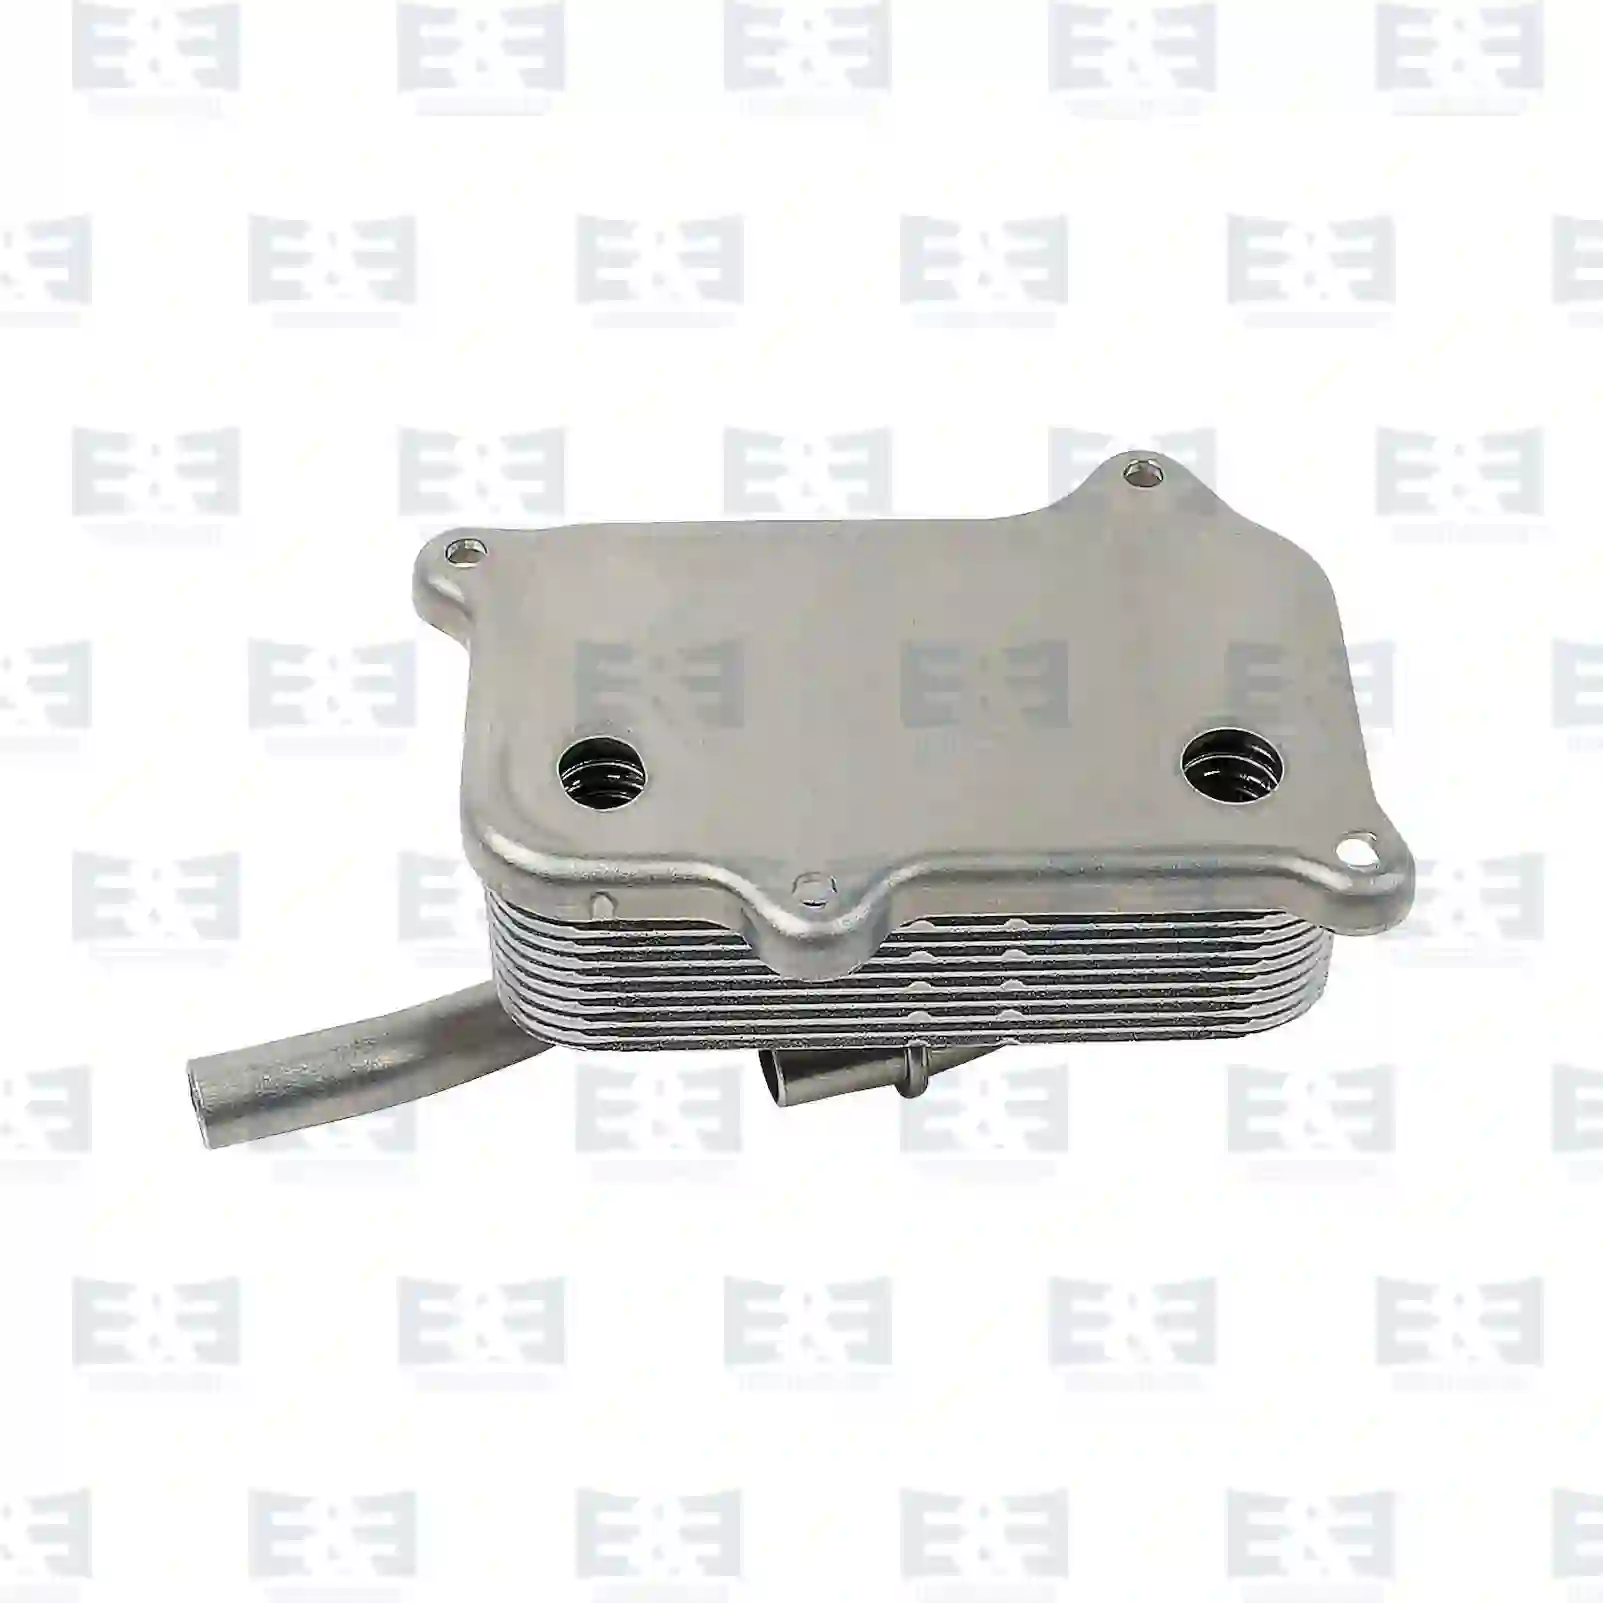  Oil cooler, without filter housing || E&E Truck Spare Parts | Truck Spare Parts, Auotomotive Spare Parts